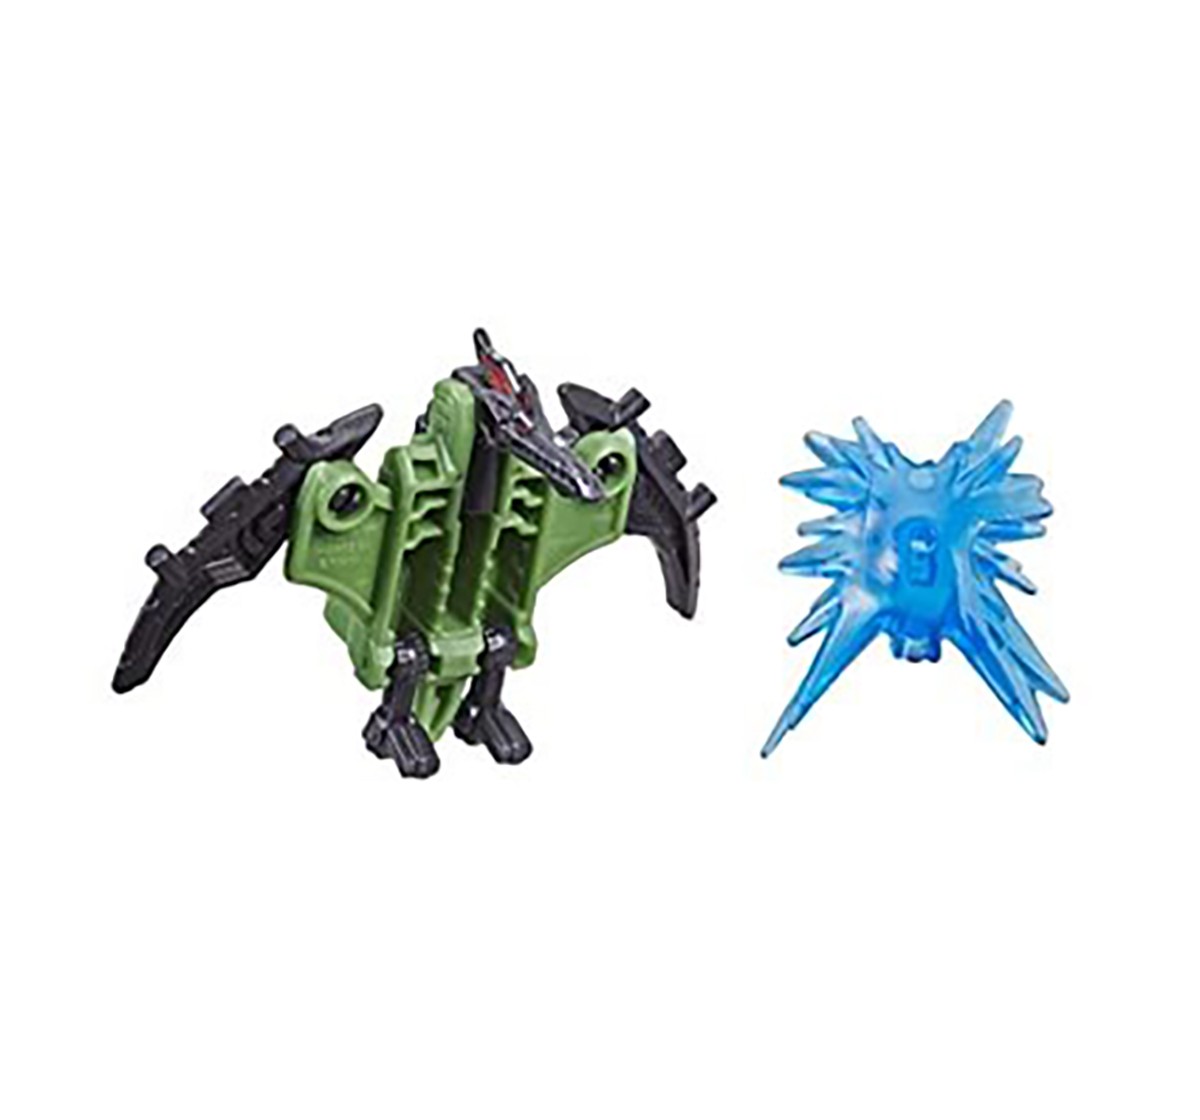 Transformers Action Figure 1.5-inch Assorted Action Figures for Kids age 8Y+ 